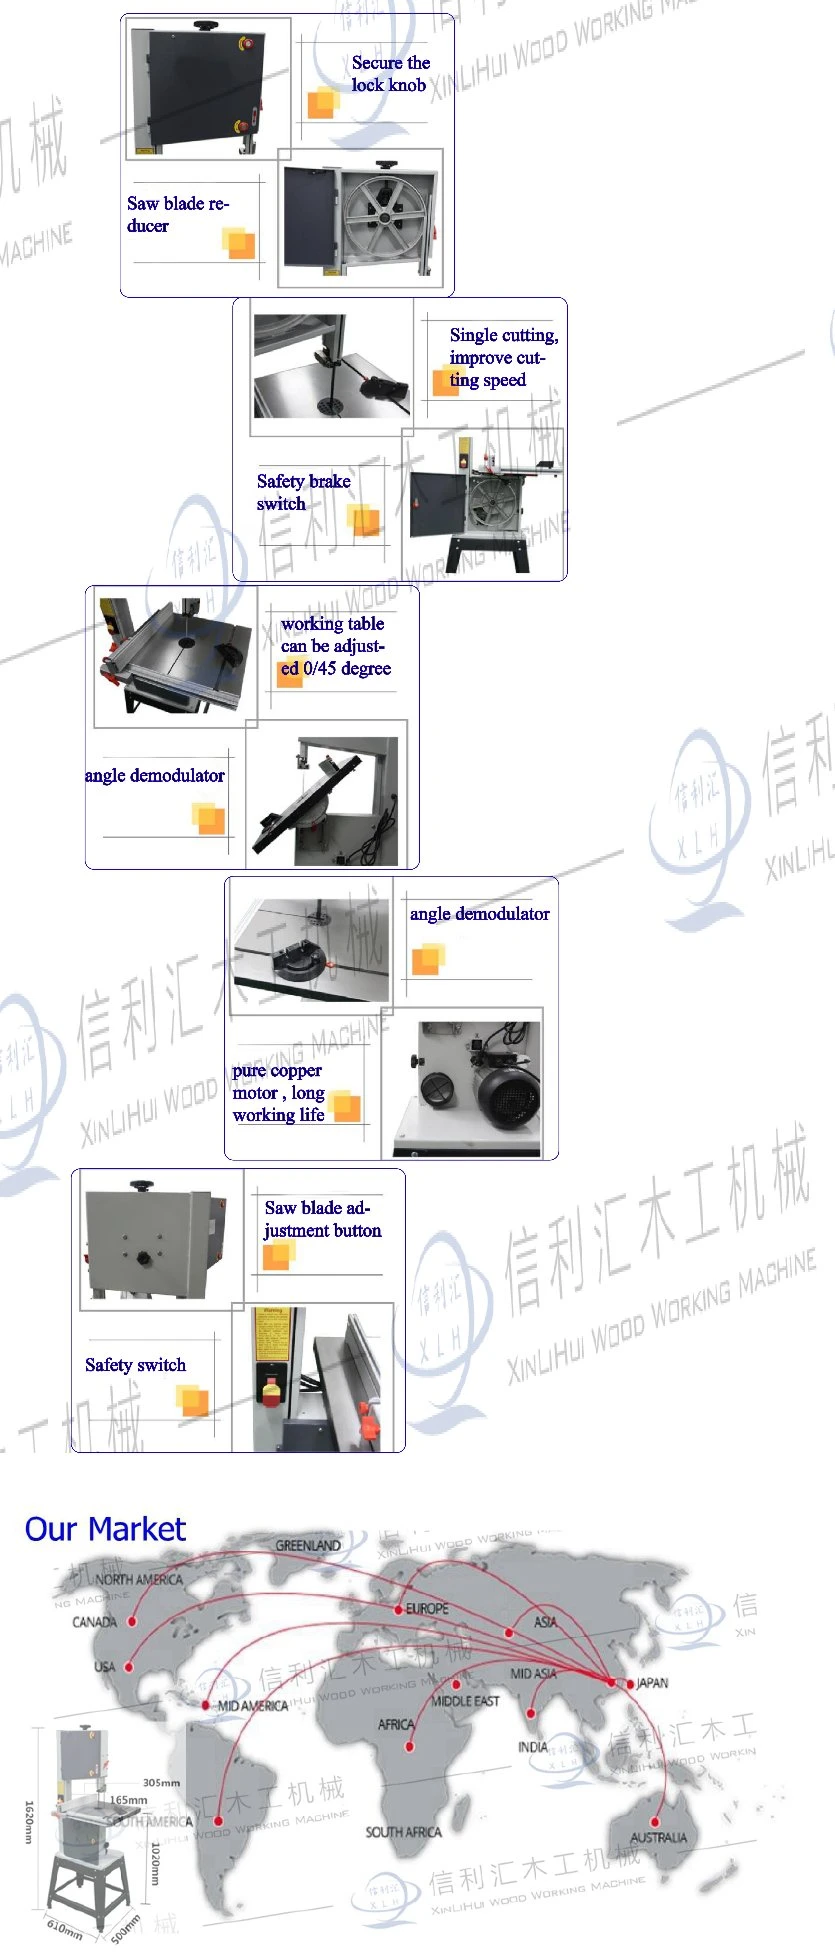 Low Price Mini Band Saw Vertical Metal Band Saw (Manual and Automatic) Woodworking Machinery/ Cheap Woodworking Saw Wood Cutting Vertical Band Sawing Machine